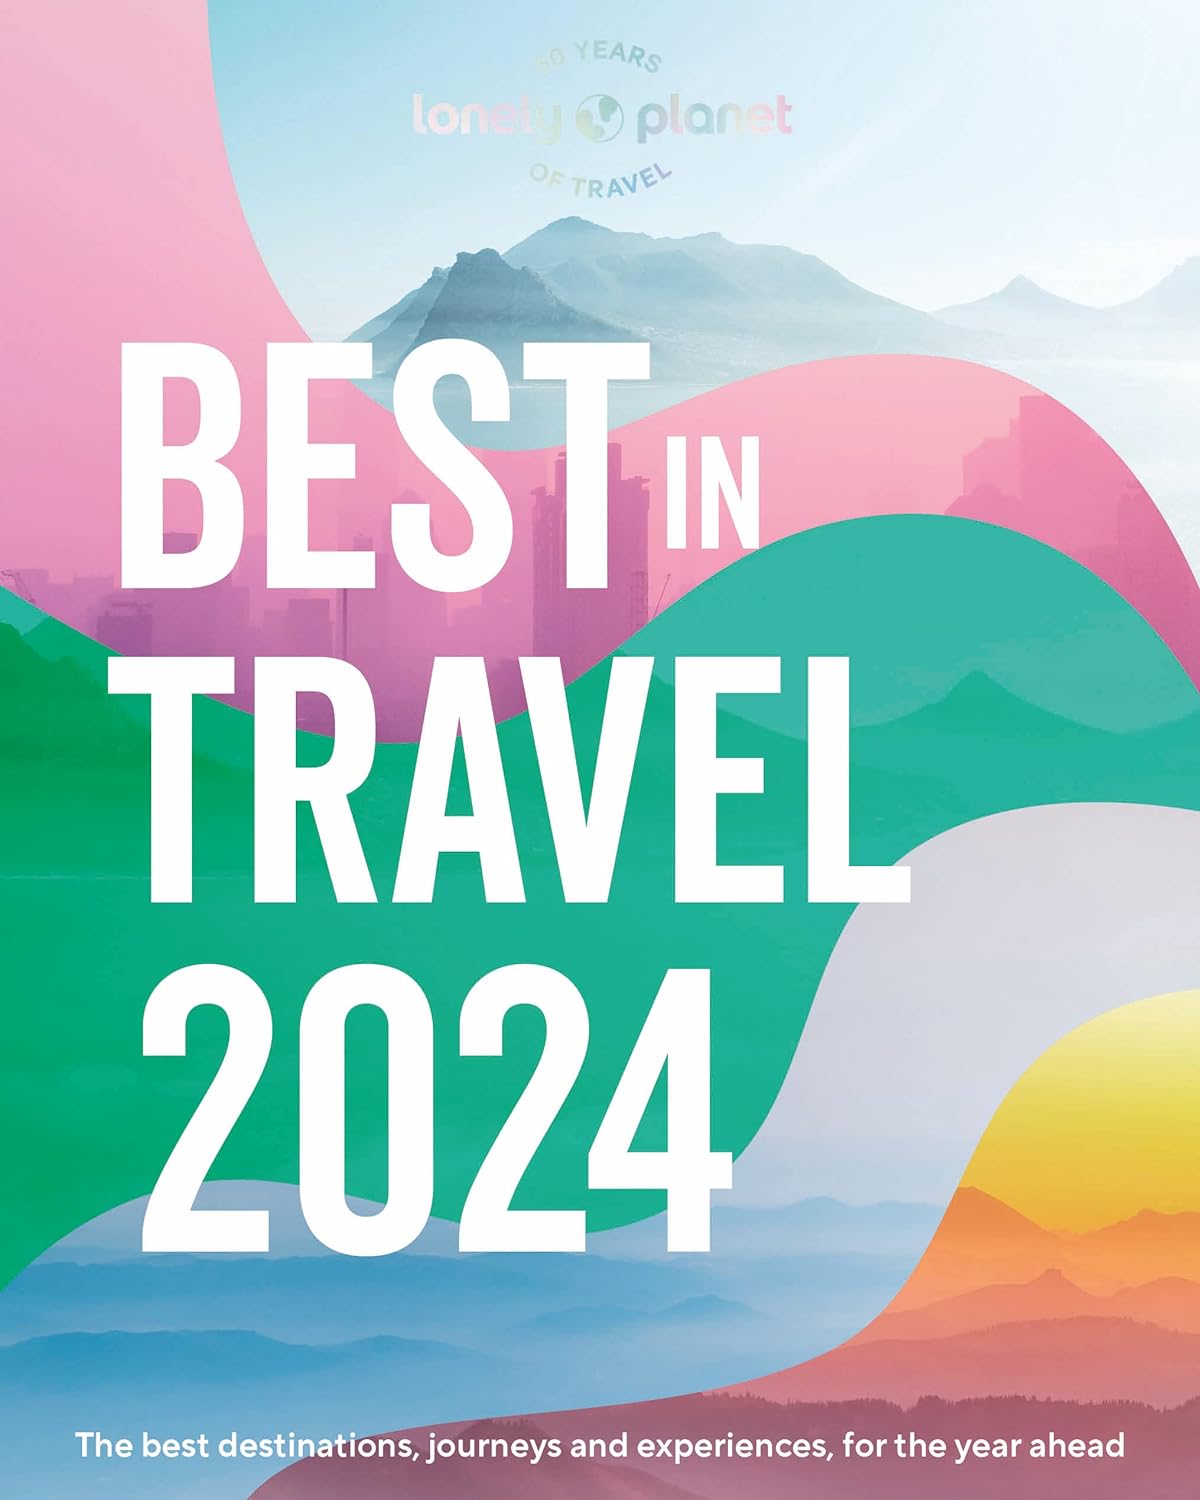 Image for "Lonely Planet&#039;s Best in Travel 2024 1"